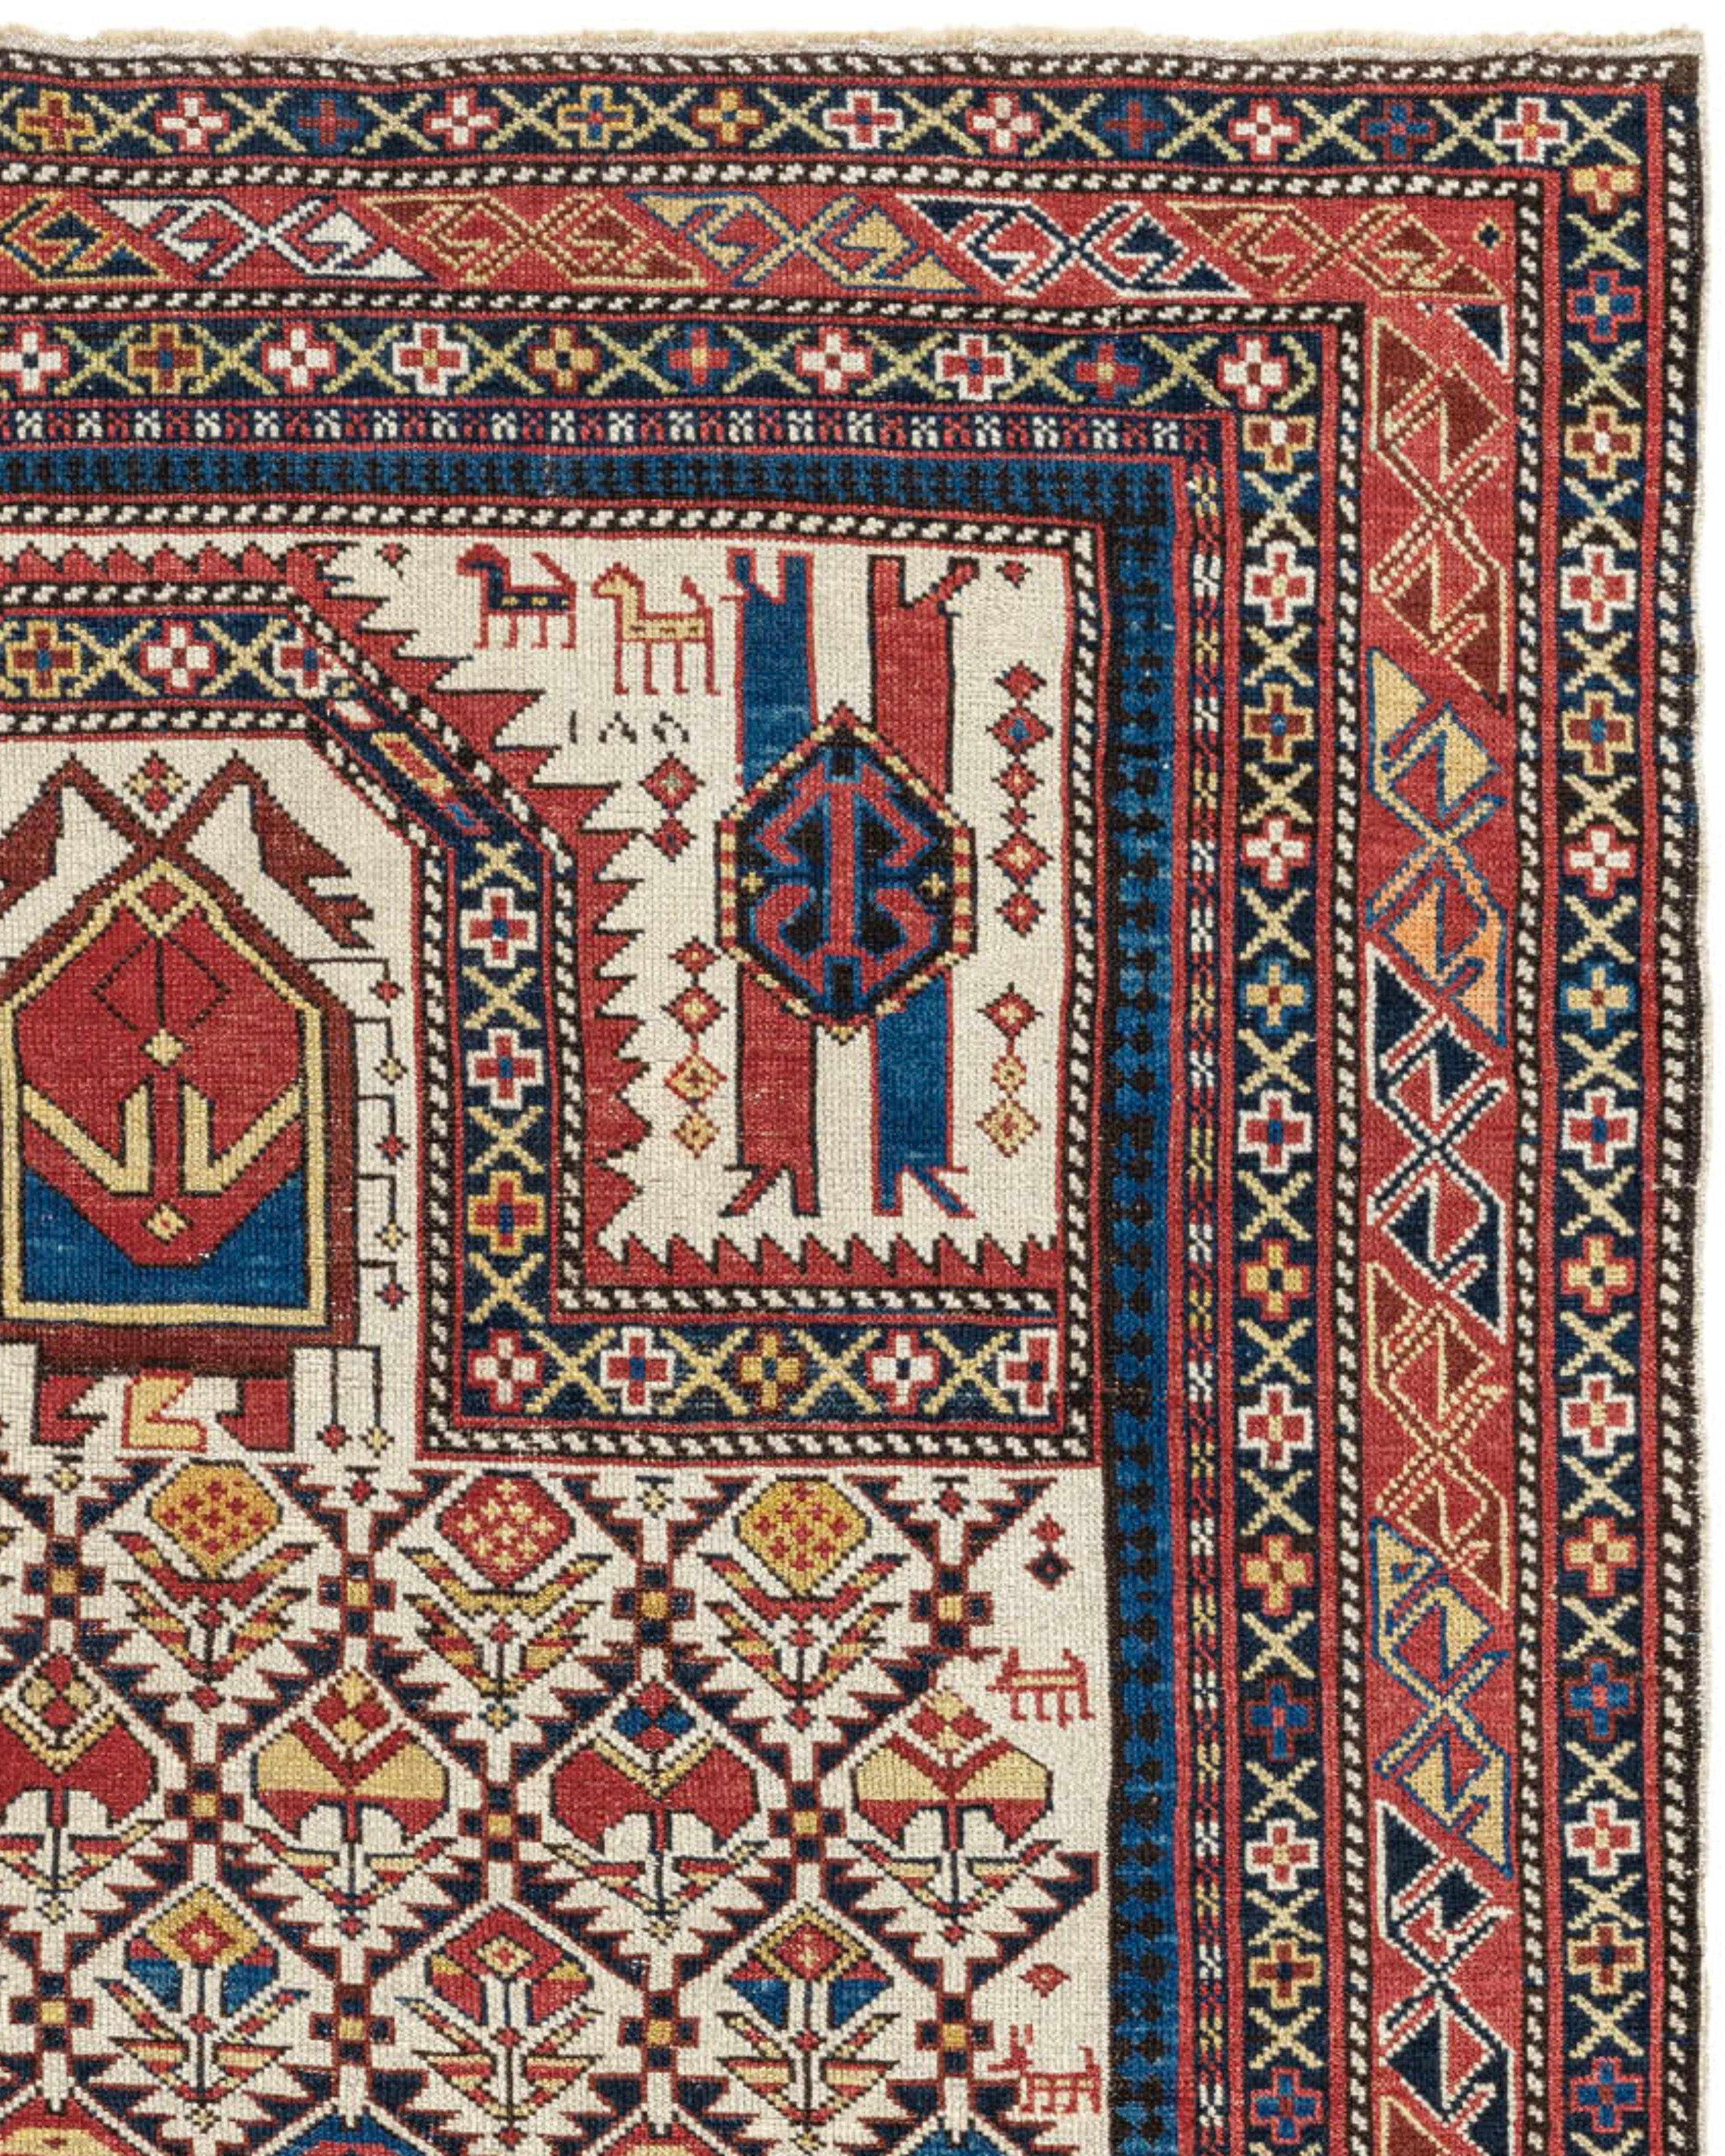 Antique Shirvan Prayer Rug, Late 19th Century

Additional Information:
Dimensions: 3'8